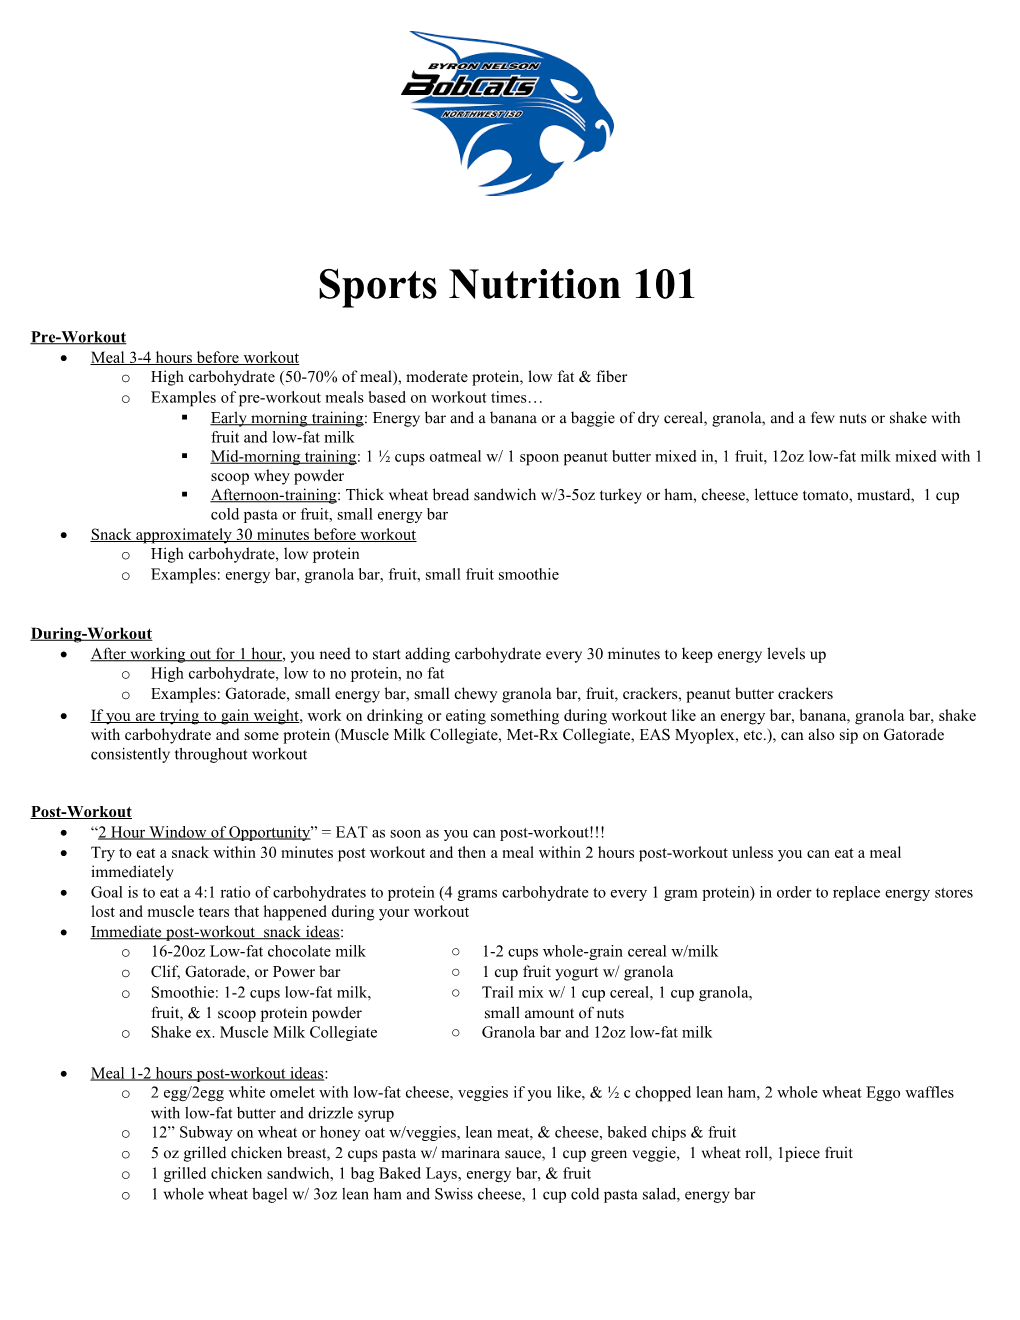 Sports Nutrition 101